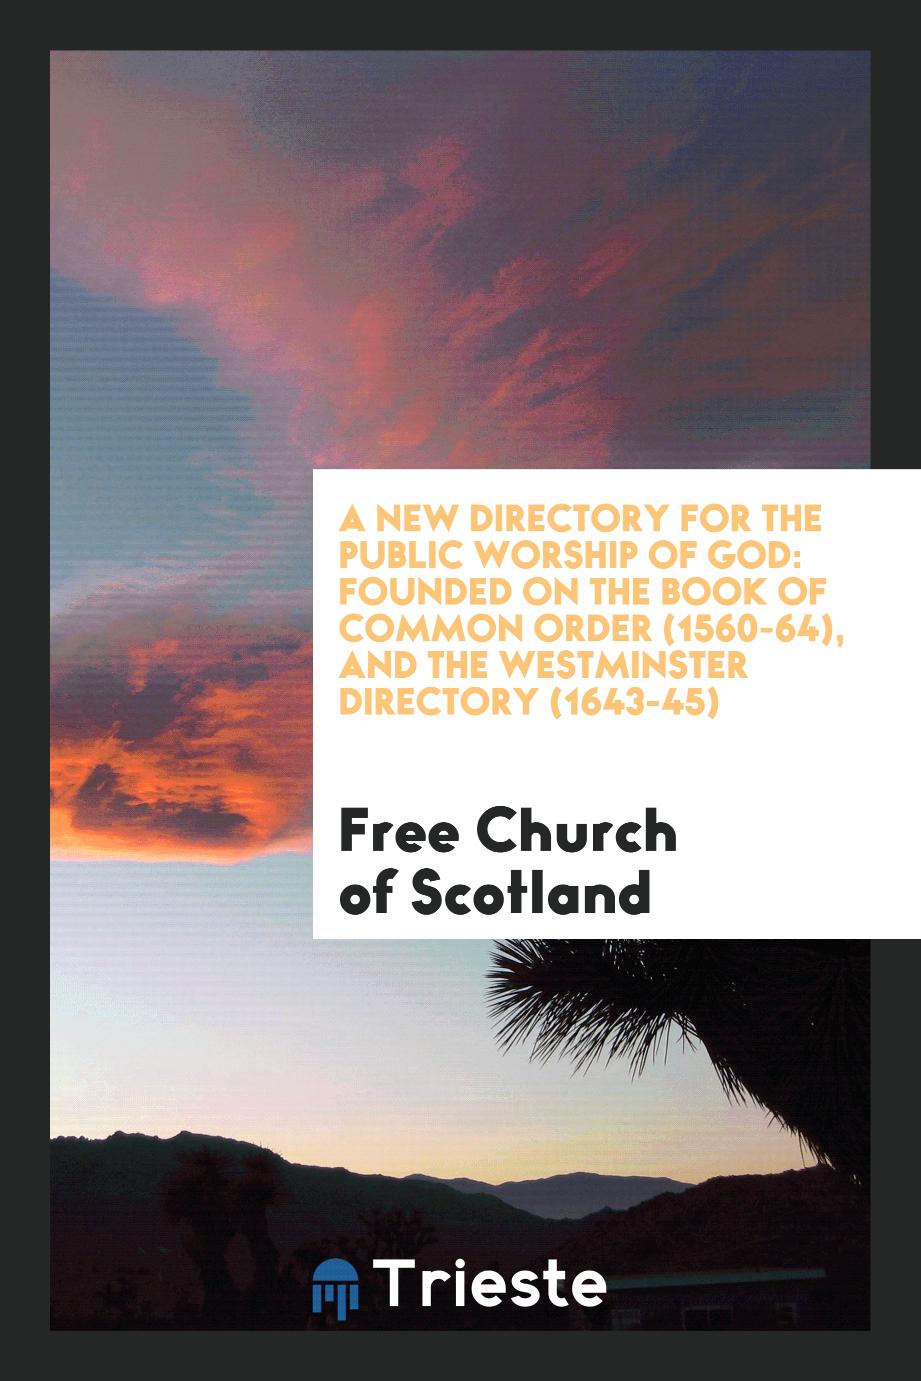 A New Directory for the Public Worship of God: Founded on the Book of Common Order (1560-64), and the Westminster Directory (1643-45)